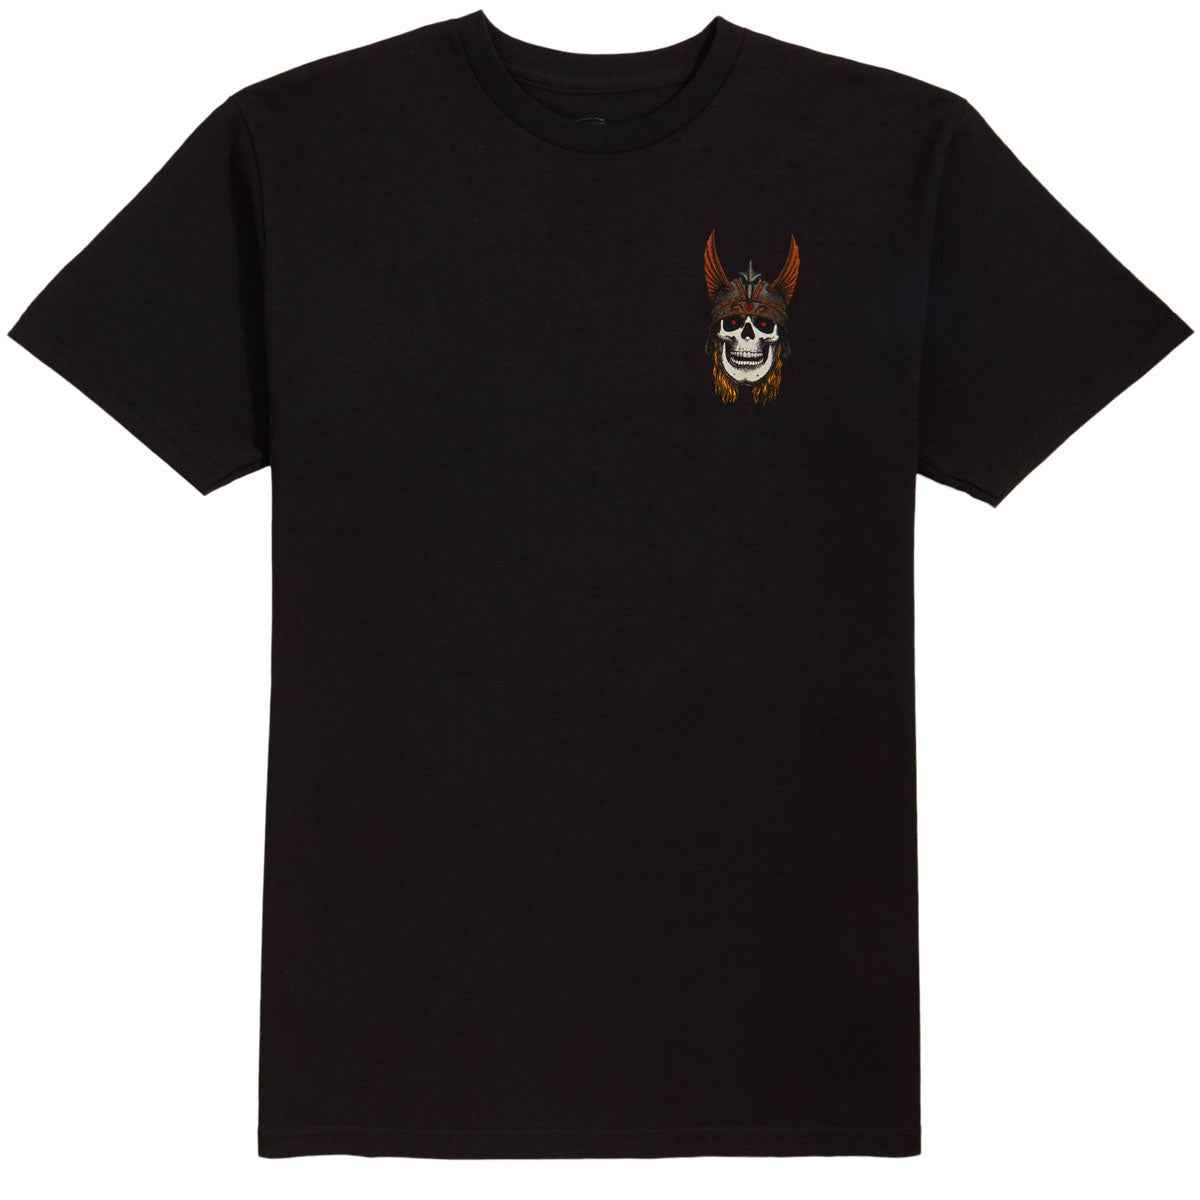 Powell-Peralta Andy Anderson Skull T-Shirt - Black image 1